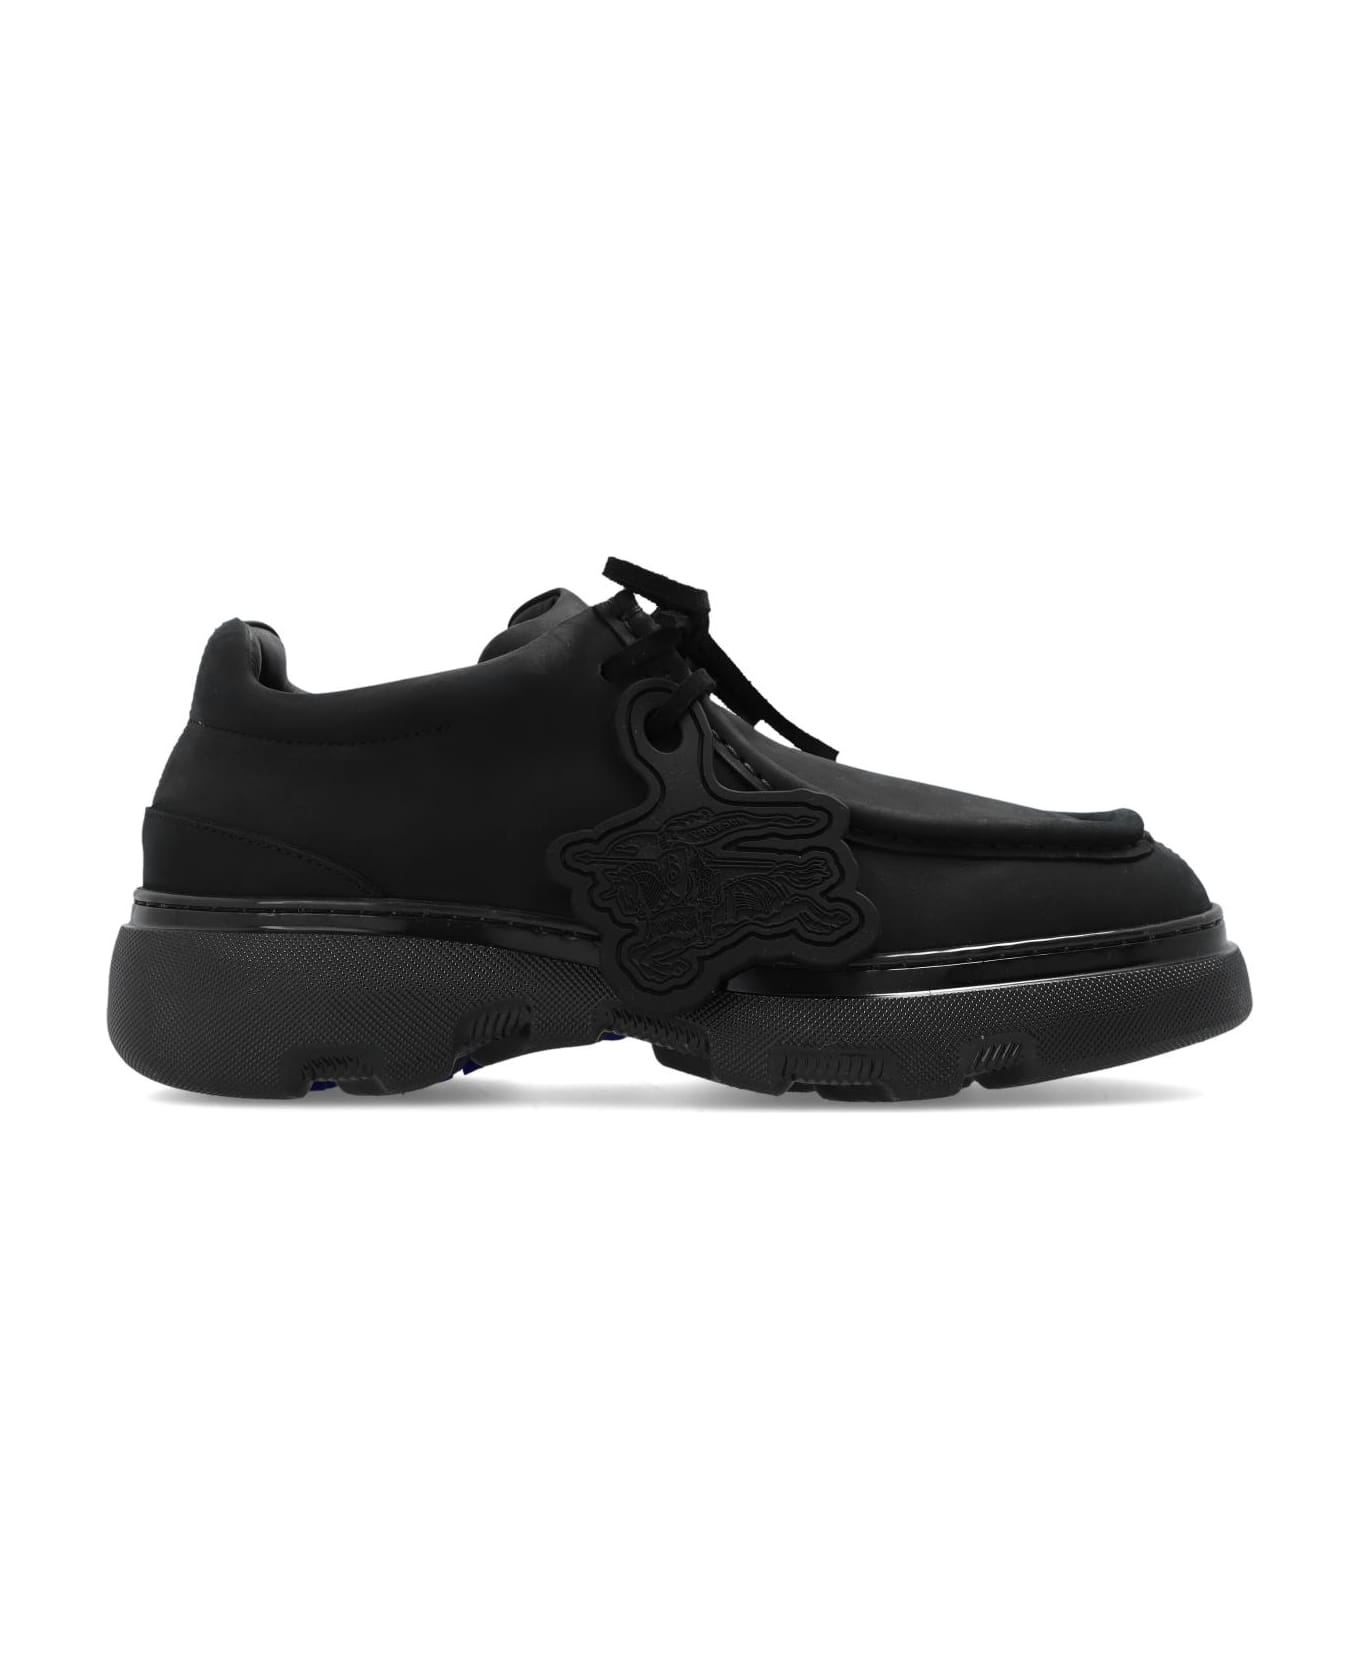 Burberry Leather Loafers - Black